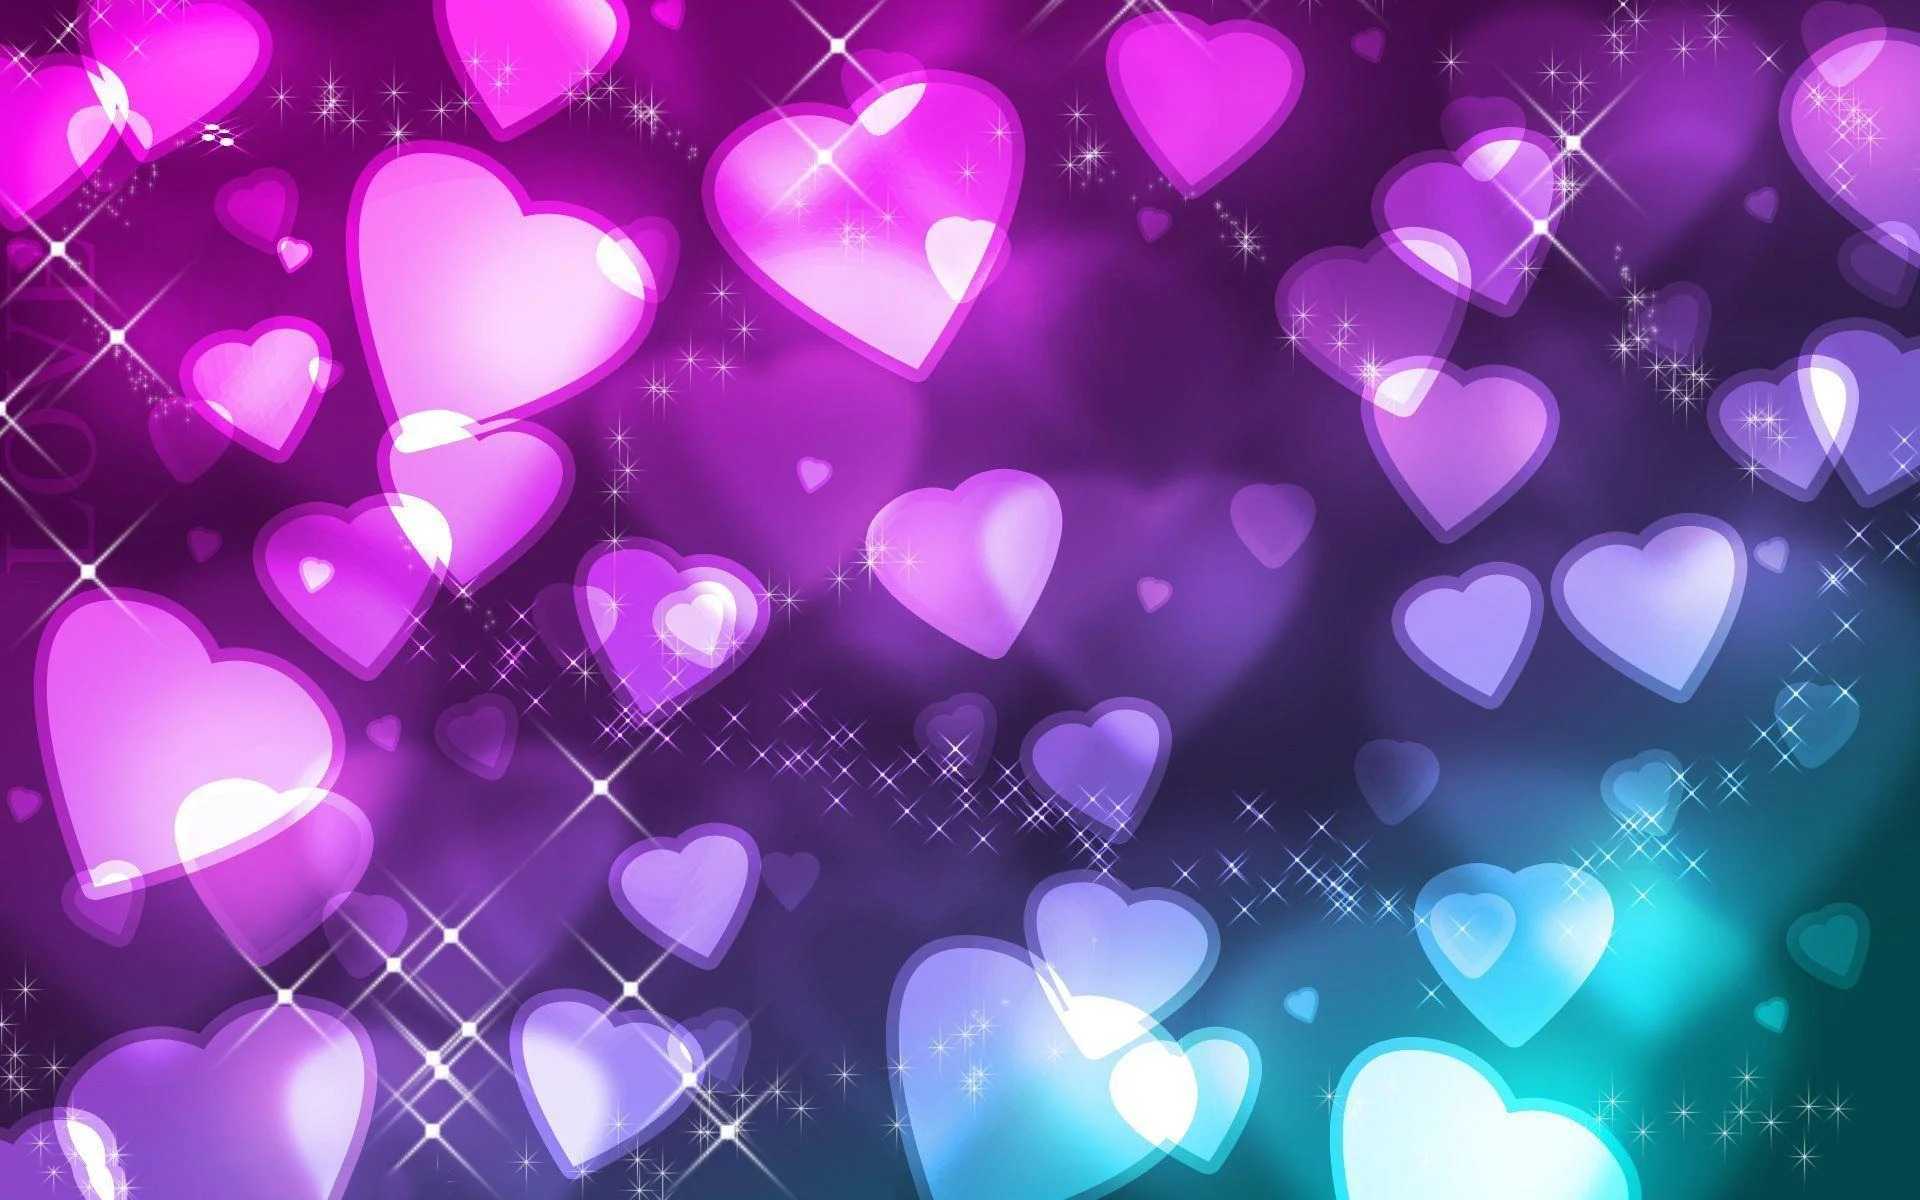 A purple and pink heart background with stars - Heart